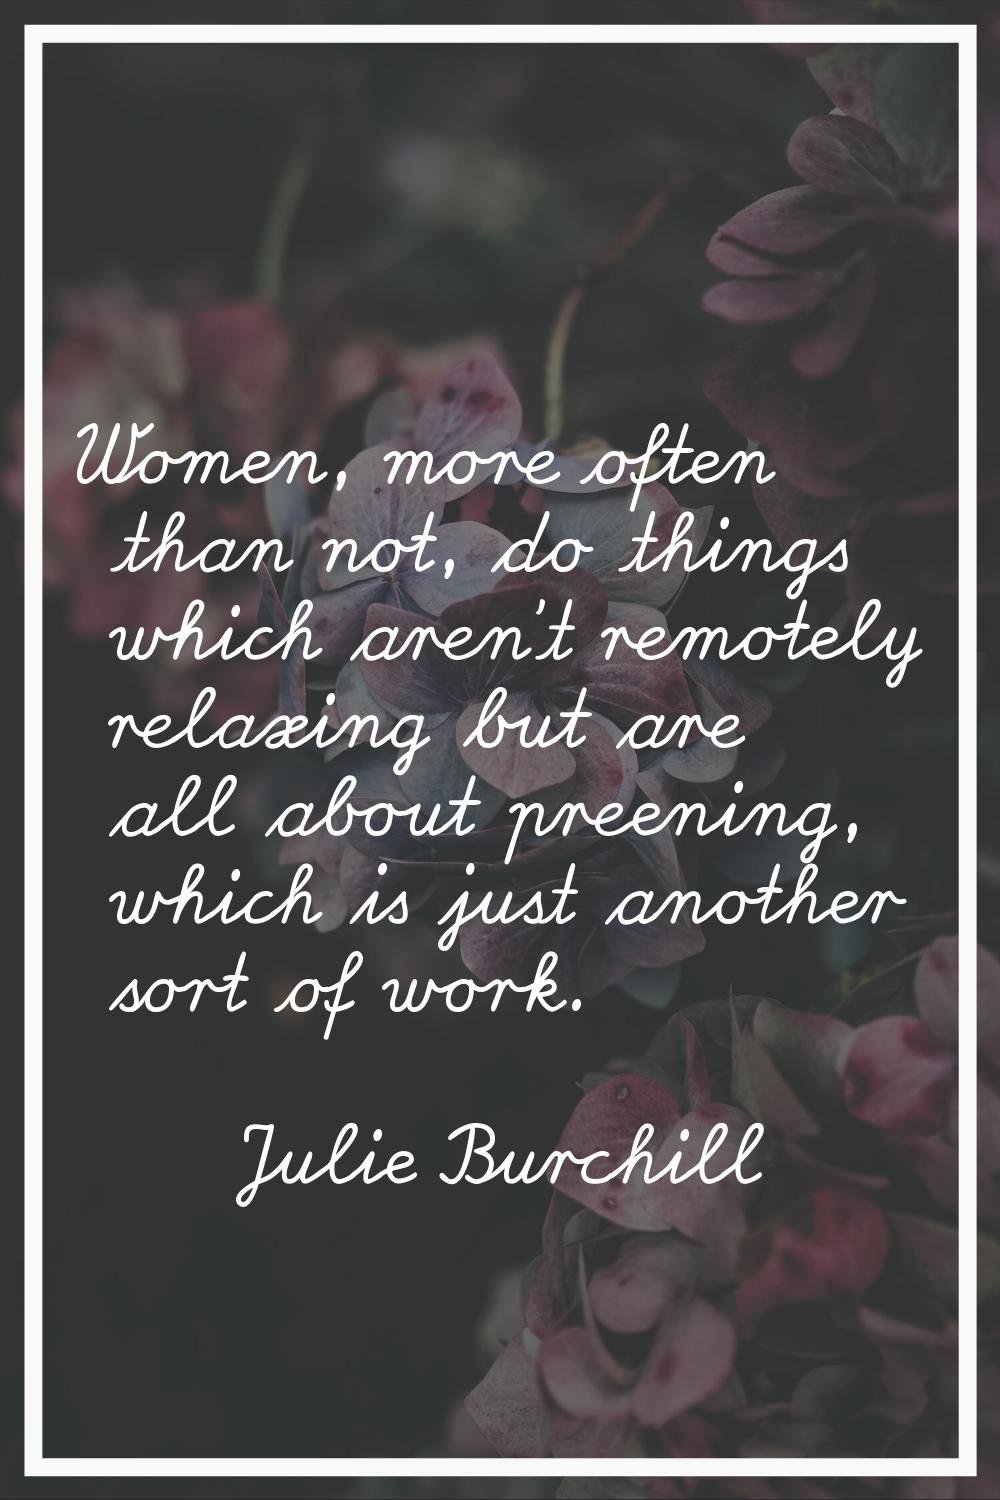 Women, more often than not, do things which aren't remotely relaxing but are all about preening, wh